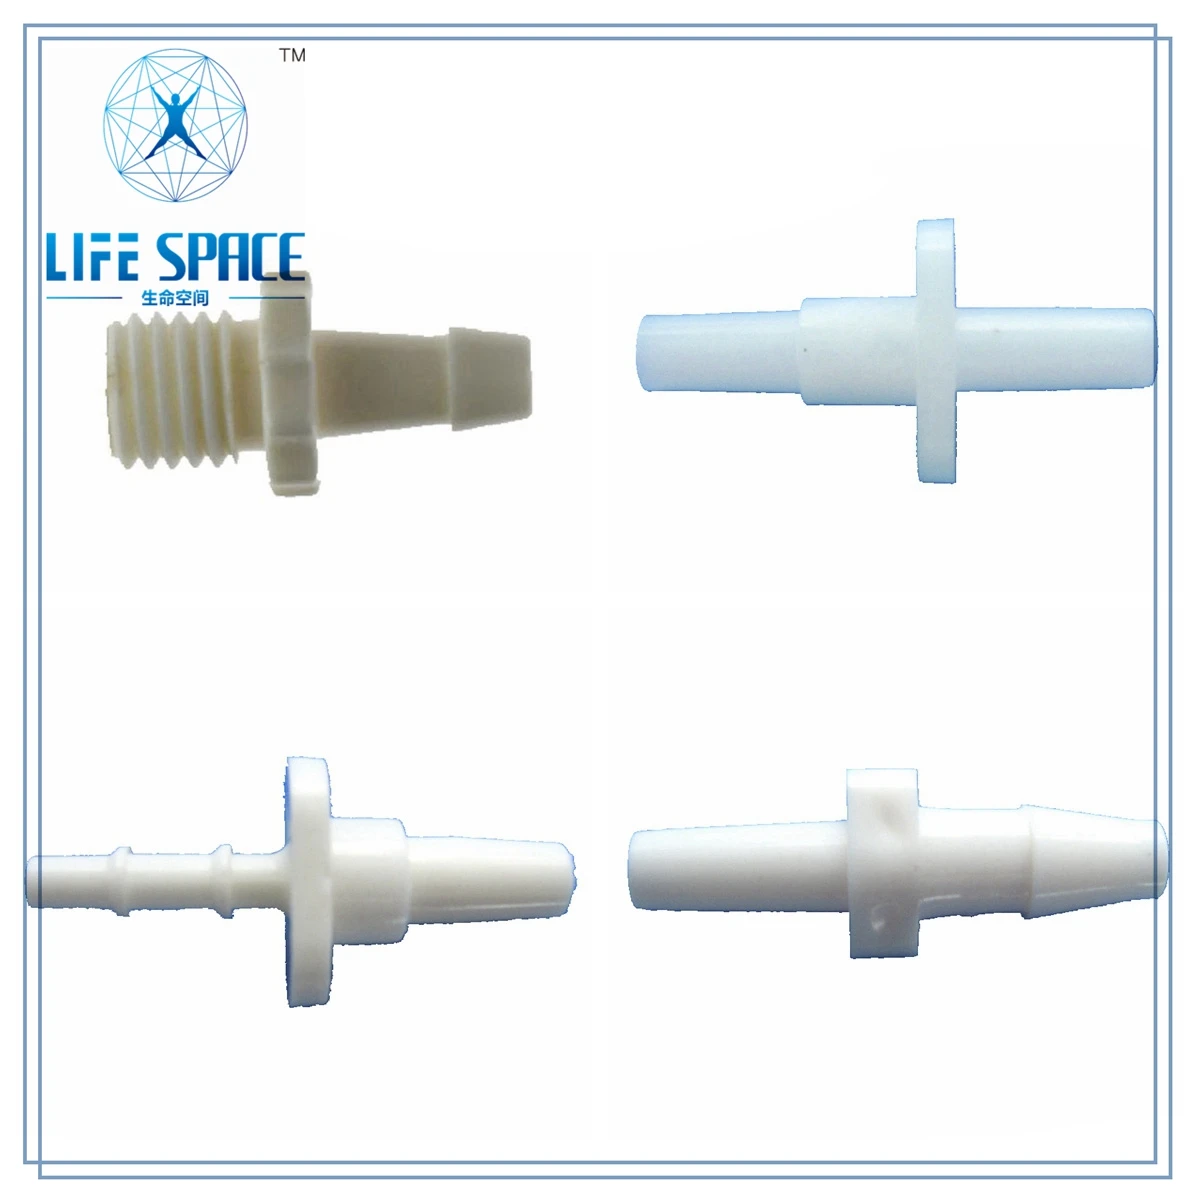 

LC-10.11.12.33 GAS connector for BP ex-tube, BP air hose, NIBP cuff and patient monitor 5pcs/pack